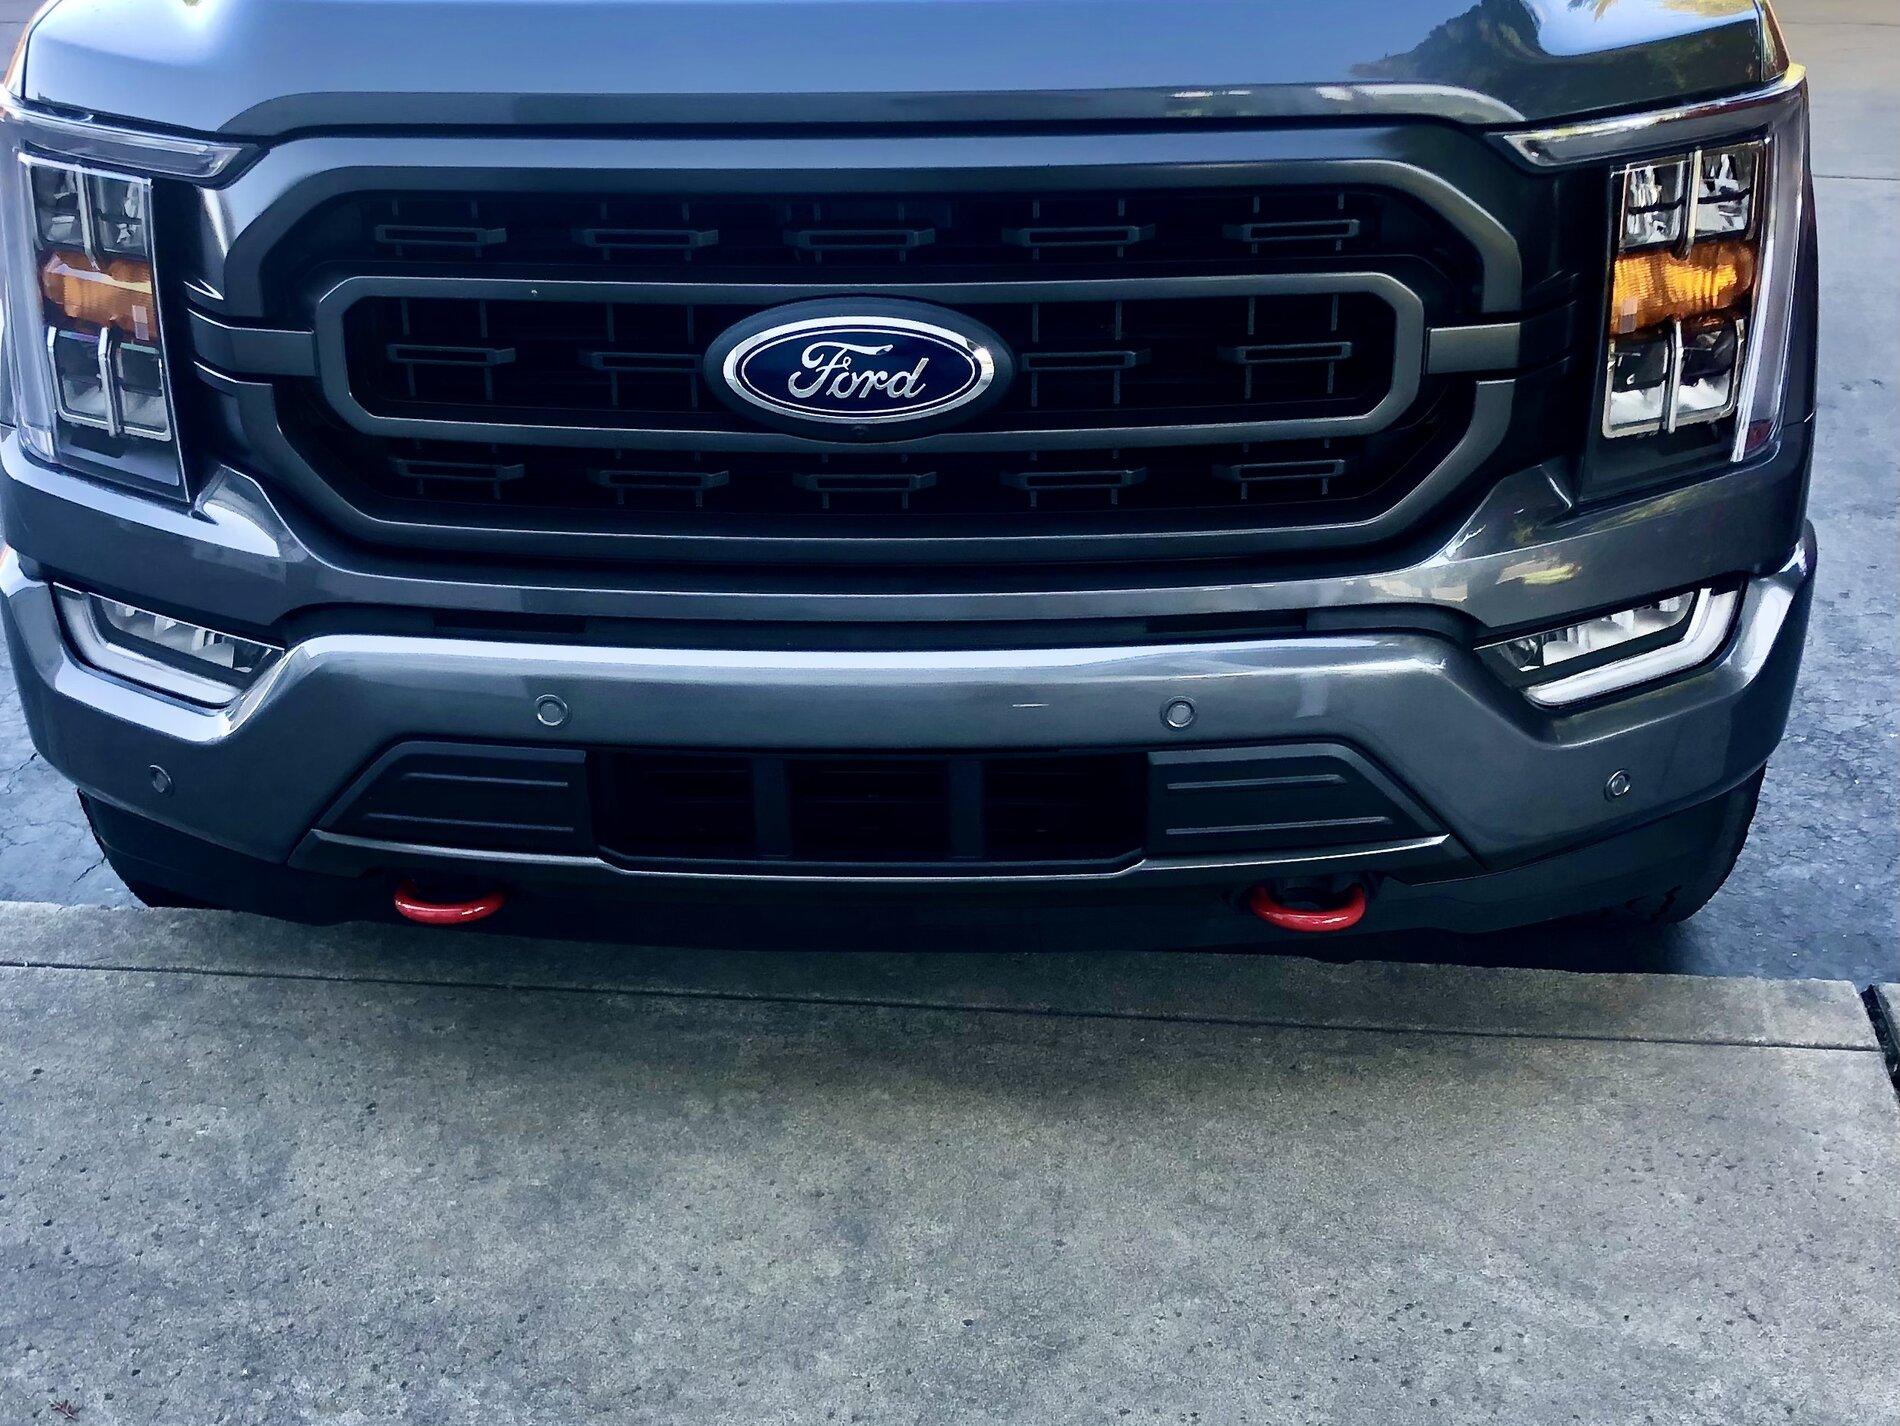 Front tow hooks on 2wd - Ford F150 Forum - Community of Ford Truck